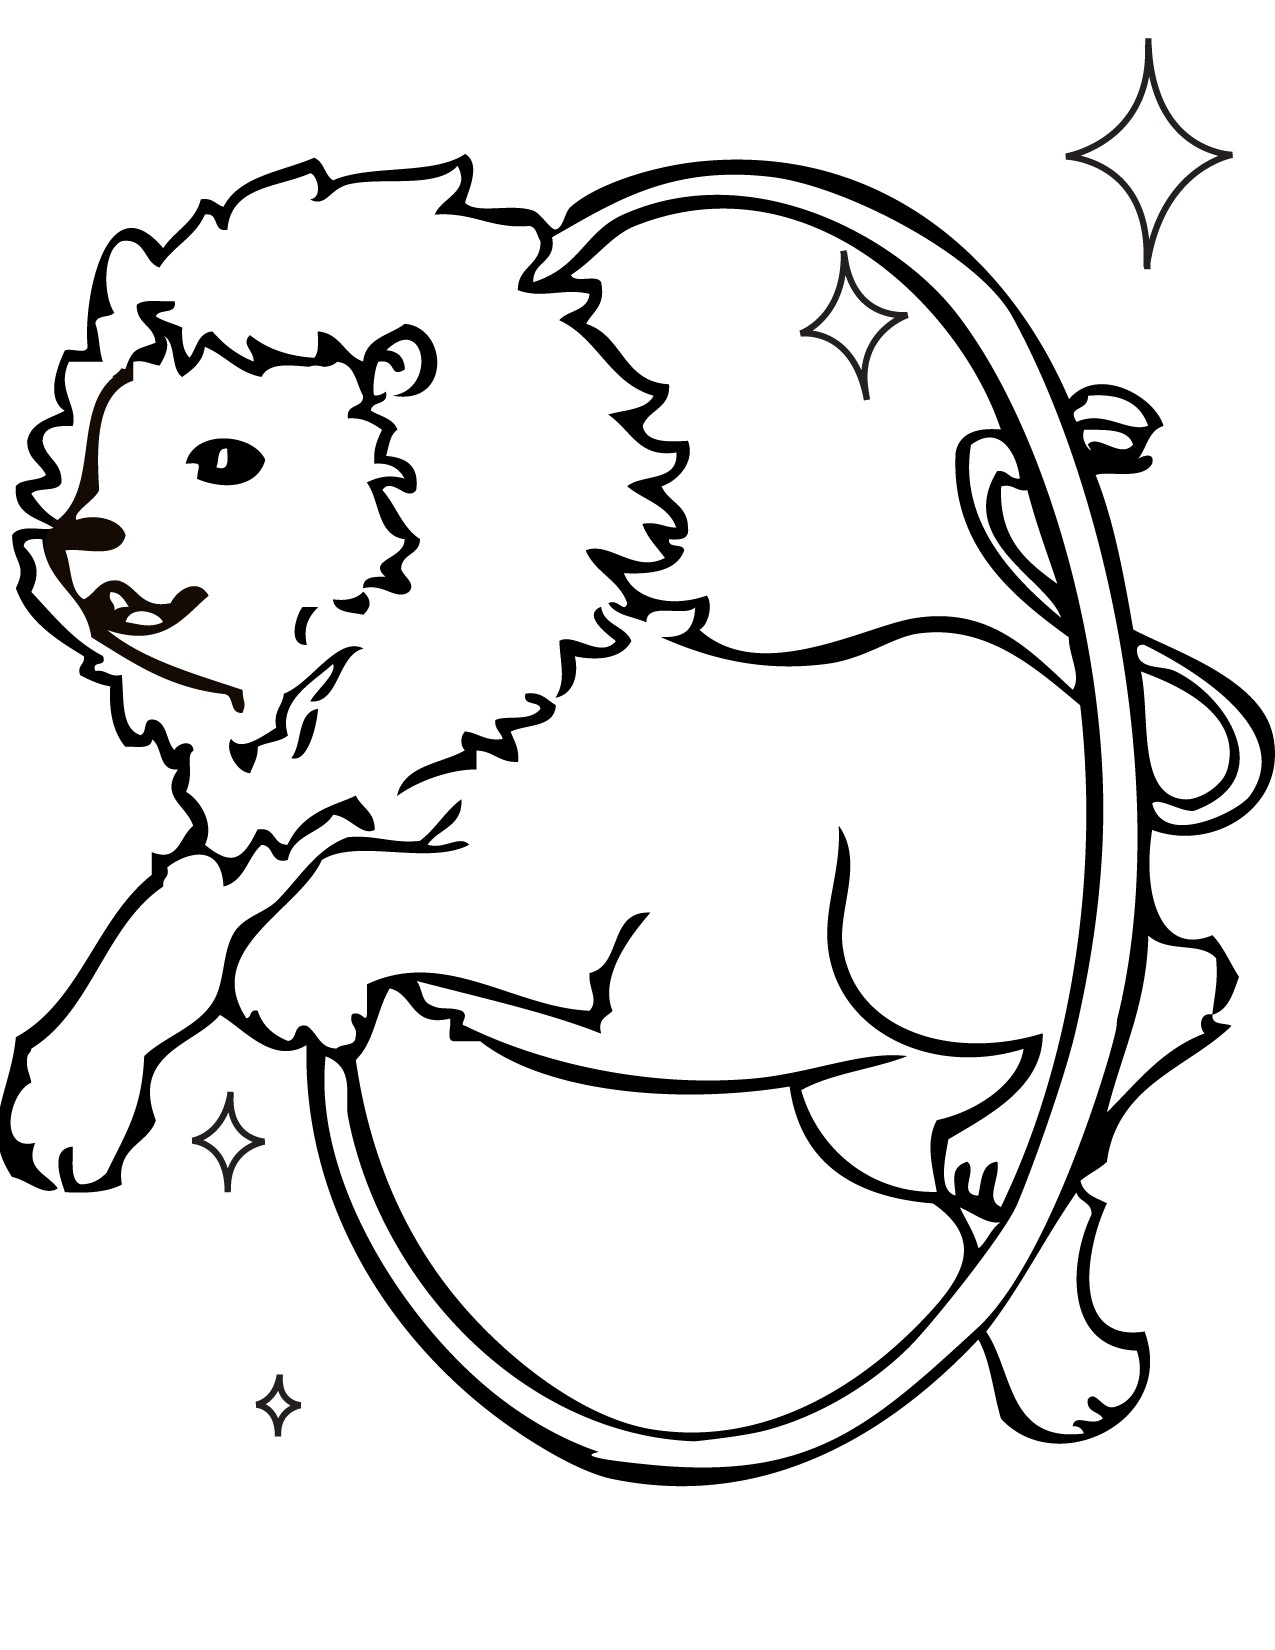 Circus Lion Coloring Pages at GetColorings.com | Free printable